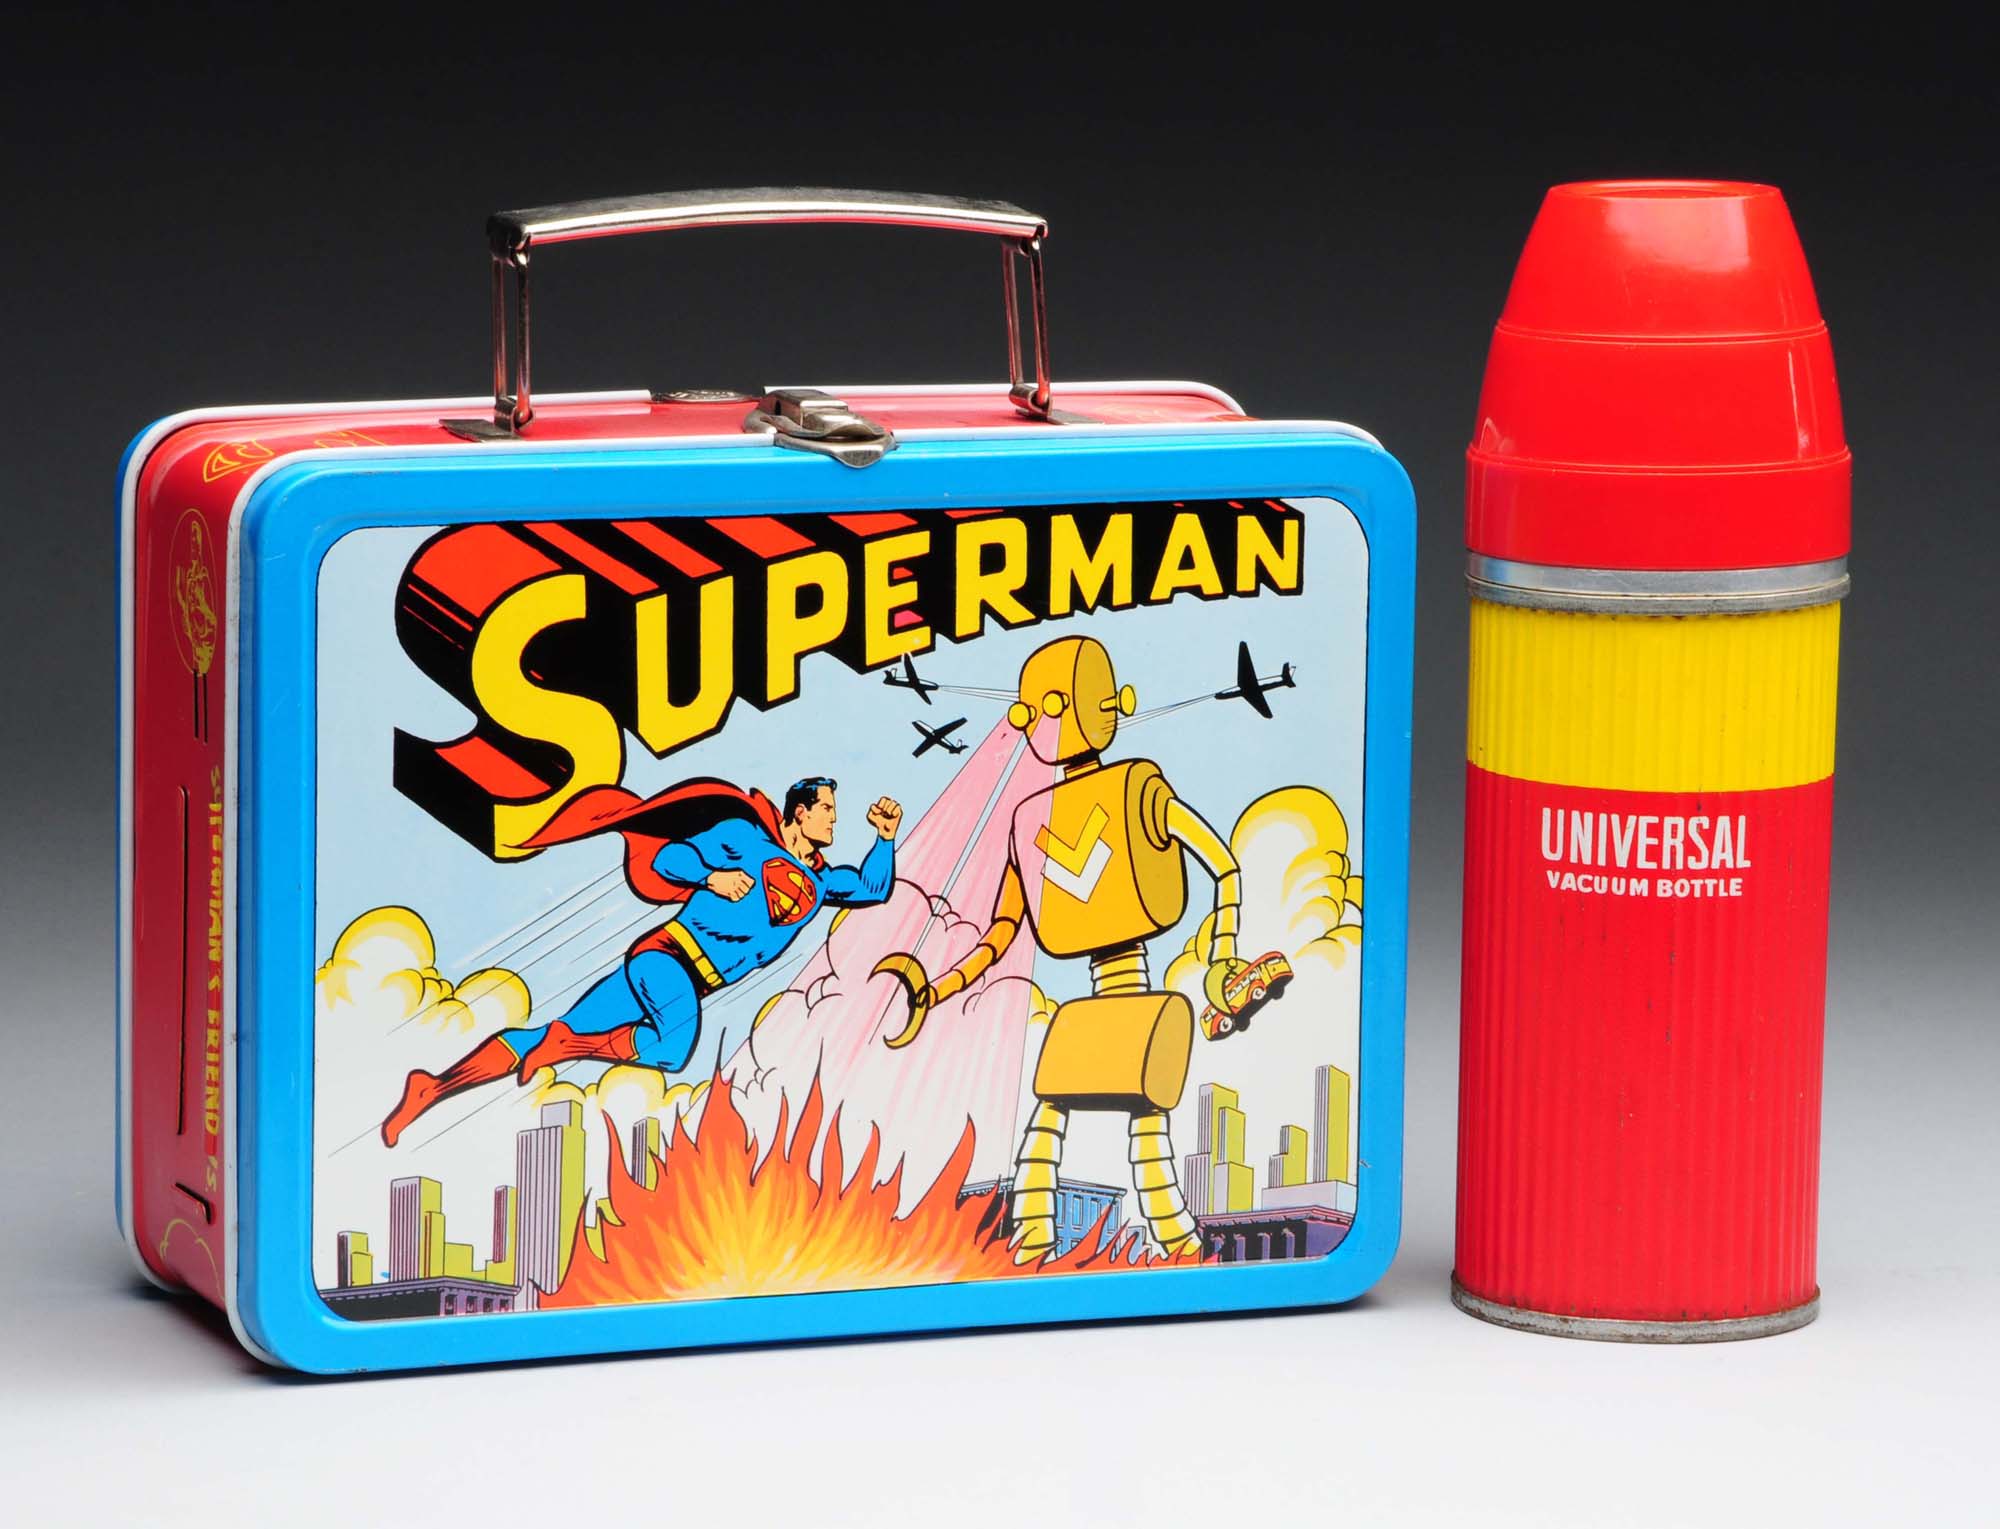 Rare 1954 Superman lunchbox with Universal vacuum bottle, possibly the finest of all known examples, est. $8,000-$12,000, from a superior collection of lunchboxes included in Morphy's Sept. 10-12 auction. Morphy Auctions image